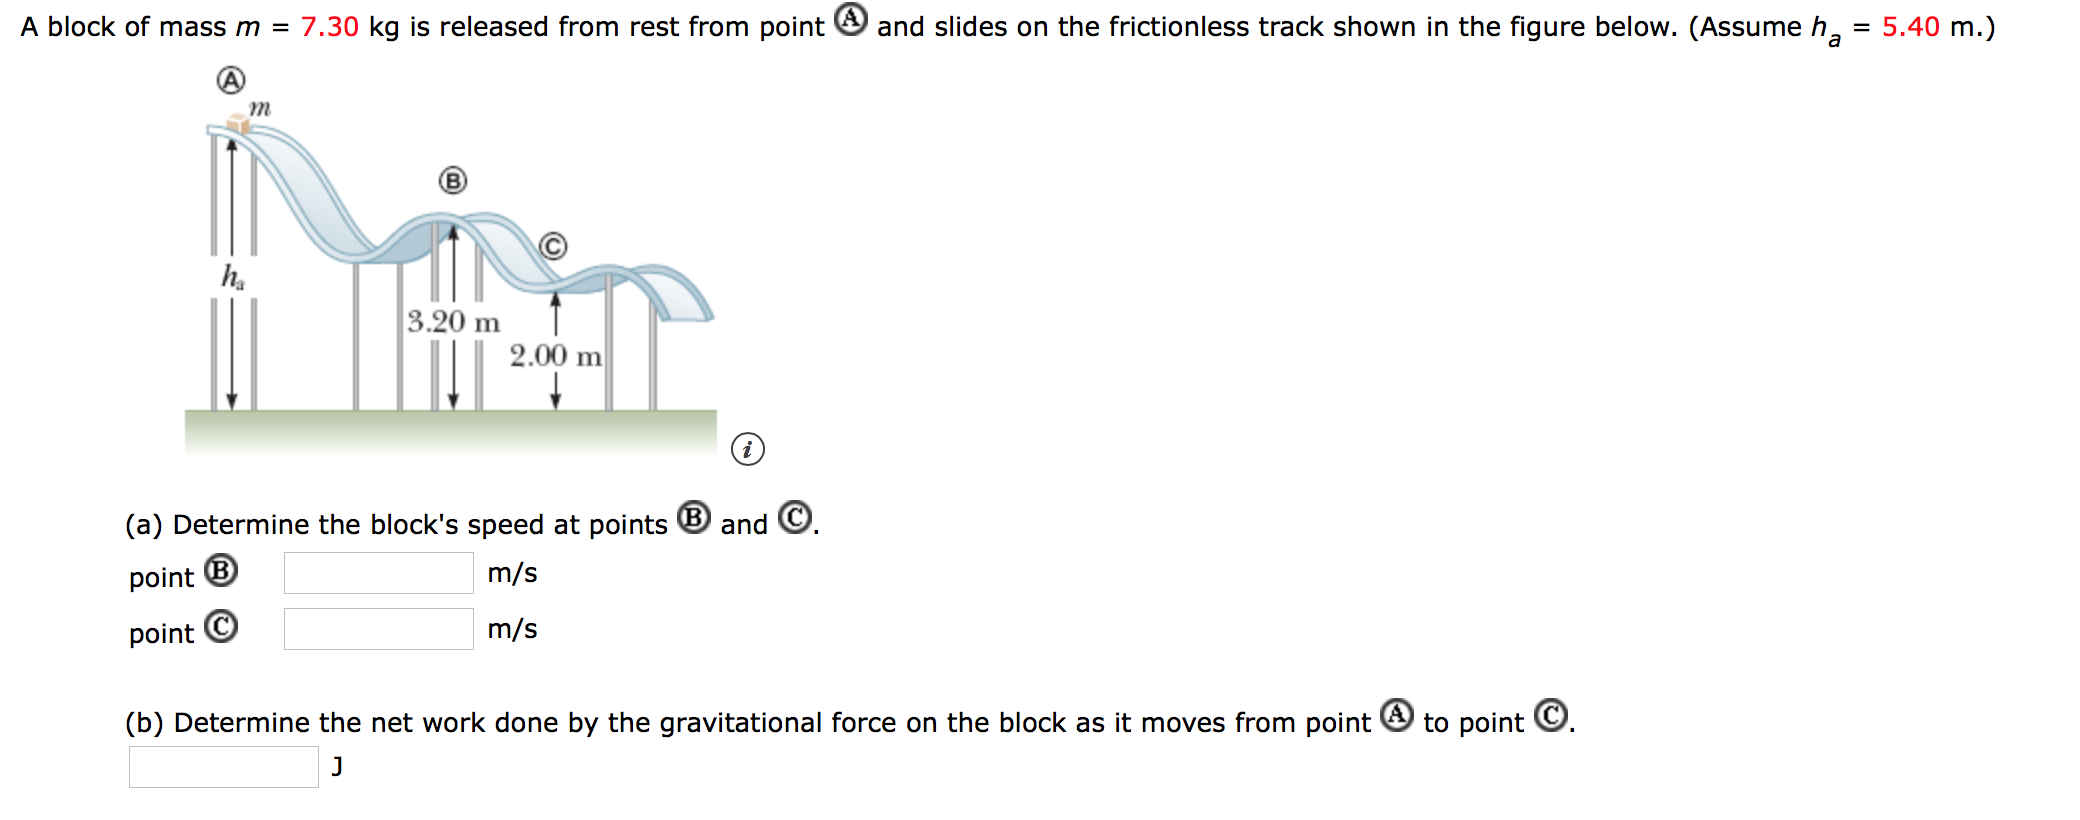 7.30 kg is released from rest from point
and slides on the frictionless track shown in the figure below. (Assume h
A block of mass m =
5.40 m.)
m
3.20 m
2.00 m
and C
(a) Determine the block's speed at points
m/s
point
m/s
point C
to point
(b) Determine the net work done by the gravitational force on the block as it moves from point
J
